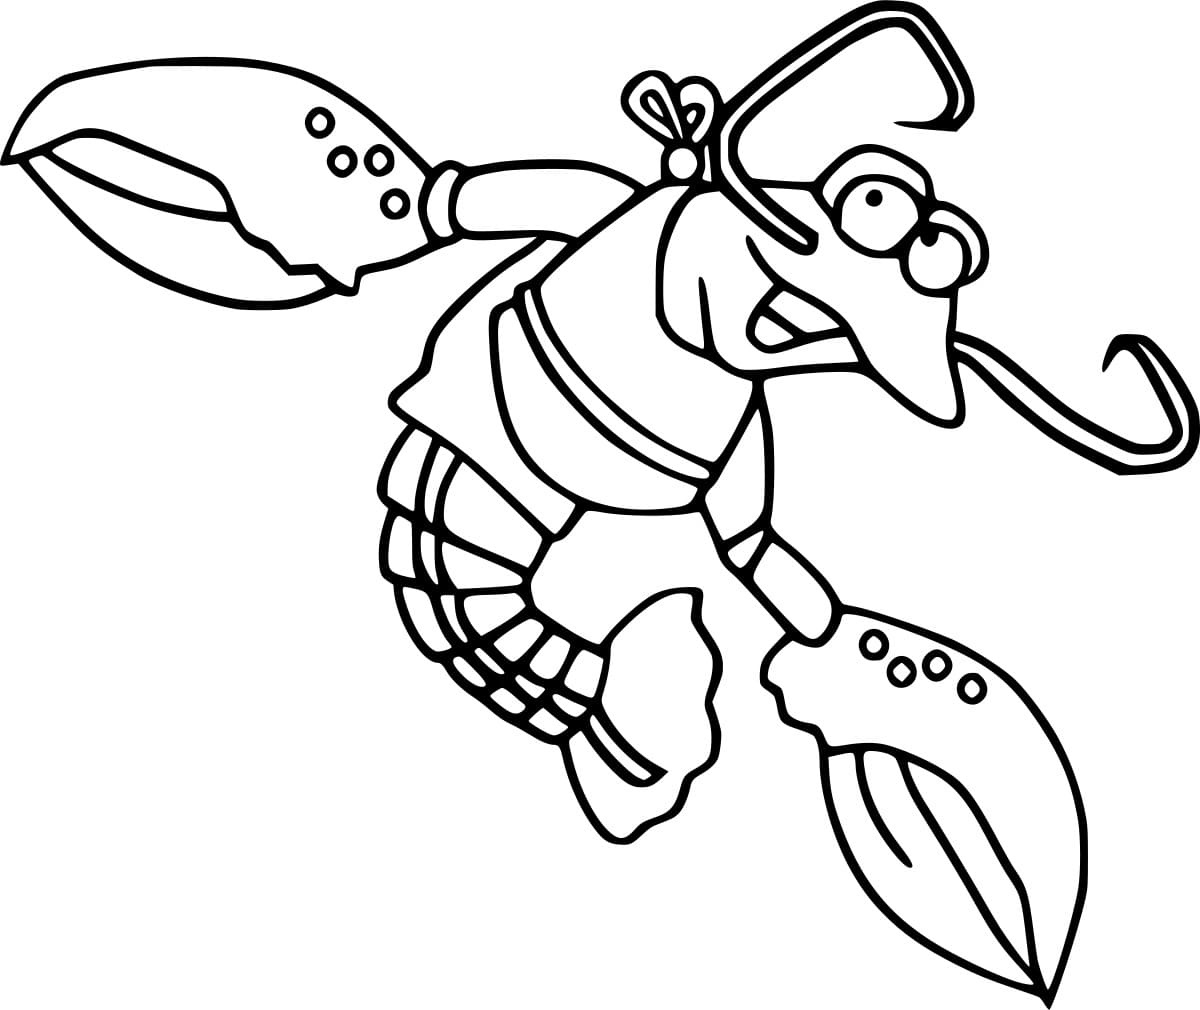 Funny Cartoon Lobster Coloring Page